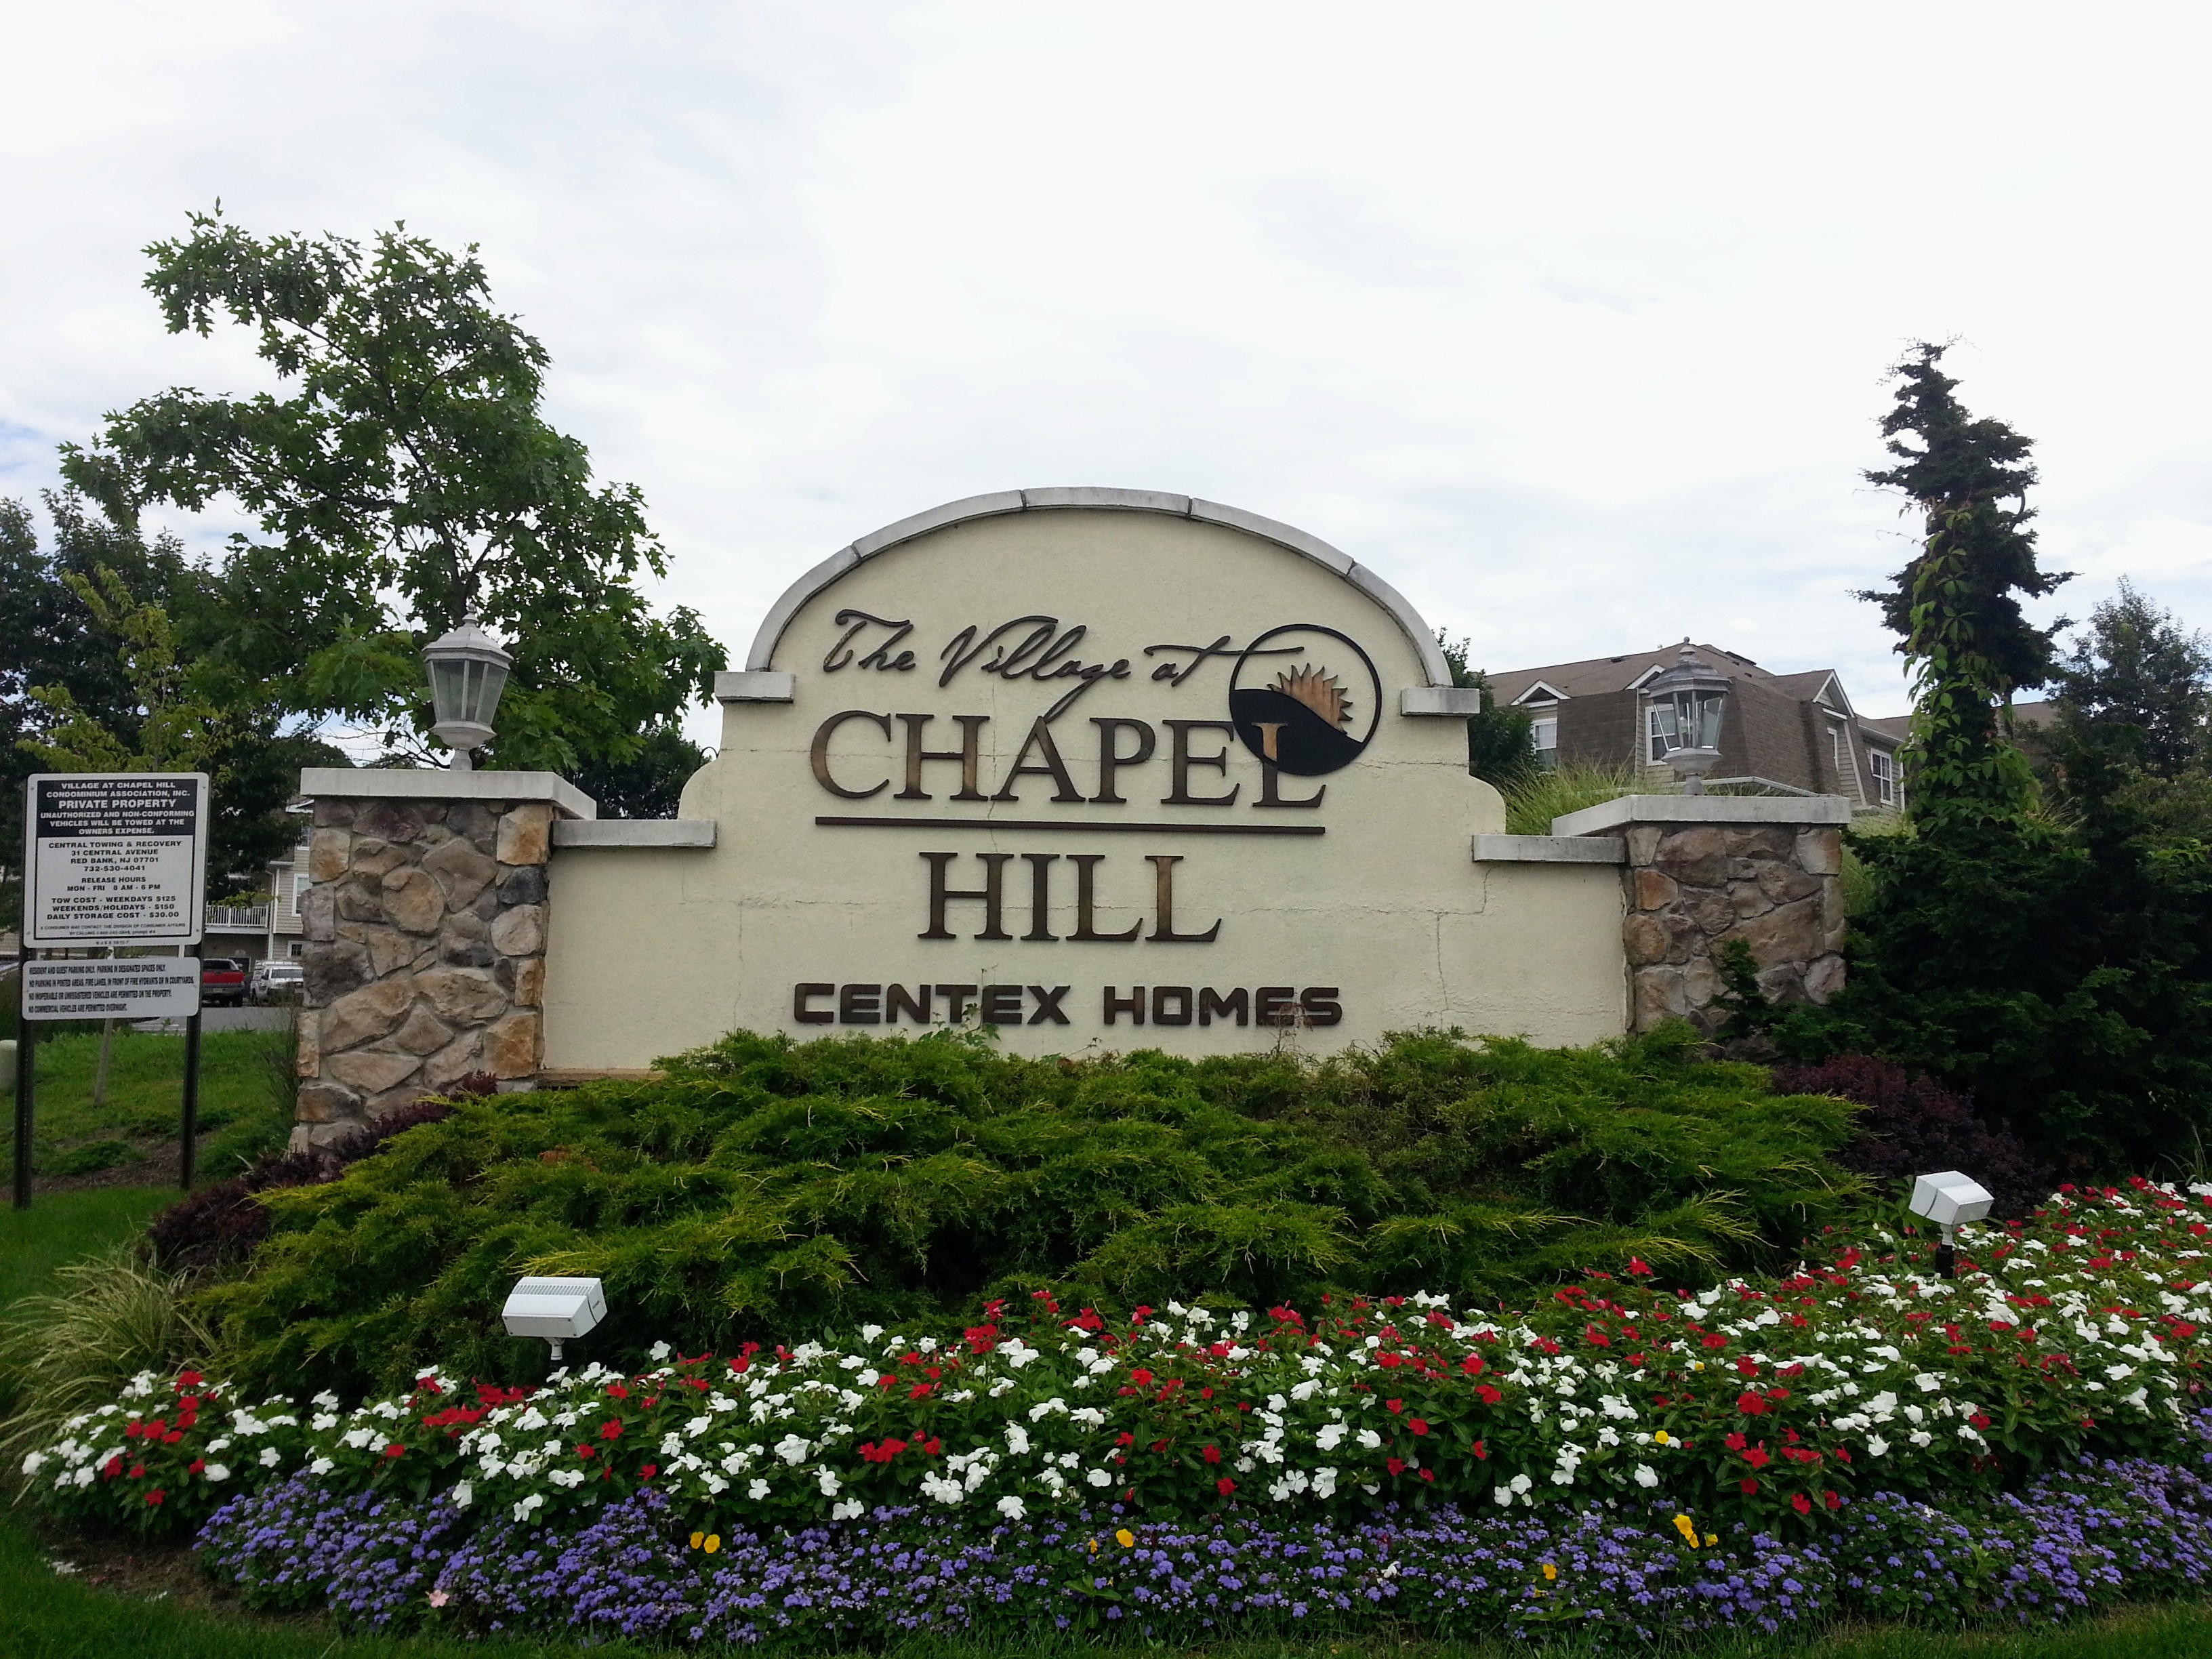 Village At Chapel Hill Condos For Sale In Middletown Nj 07748